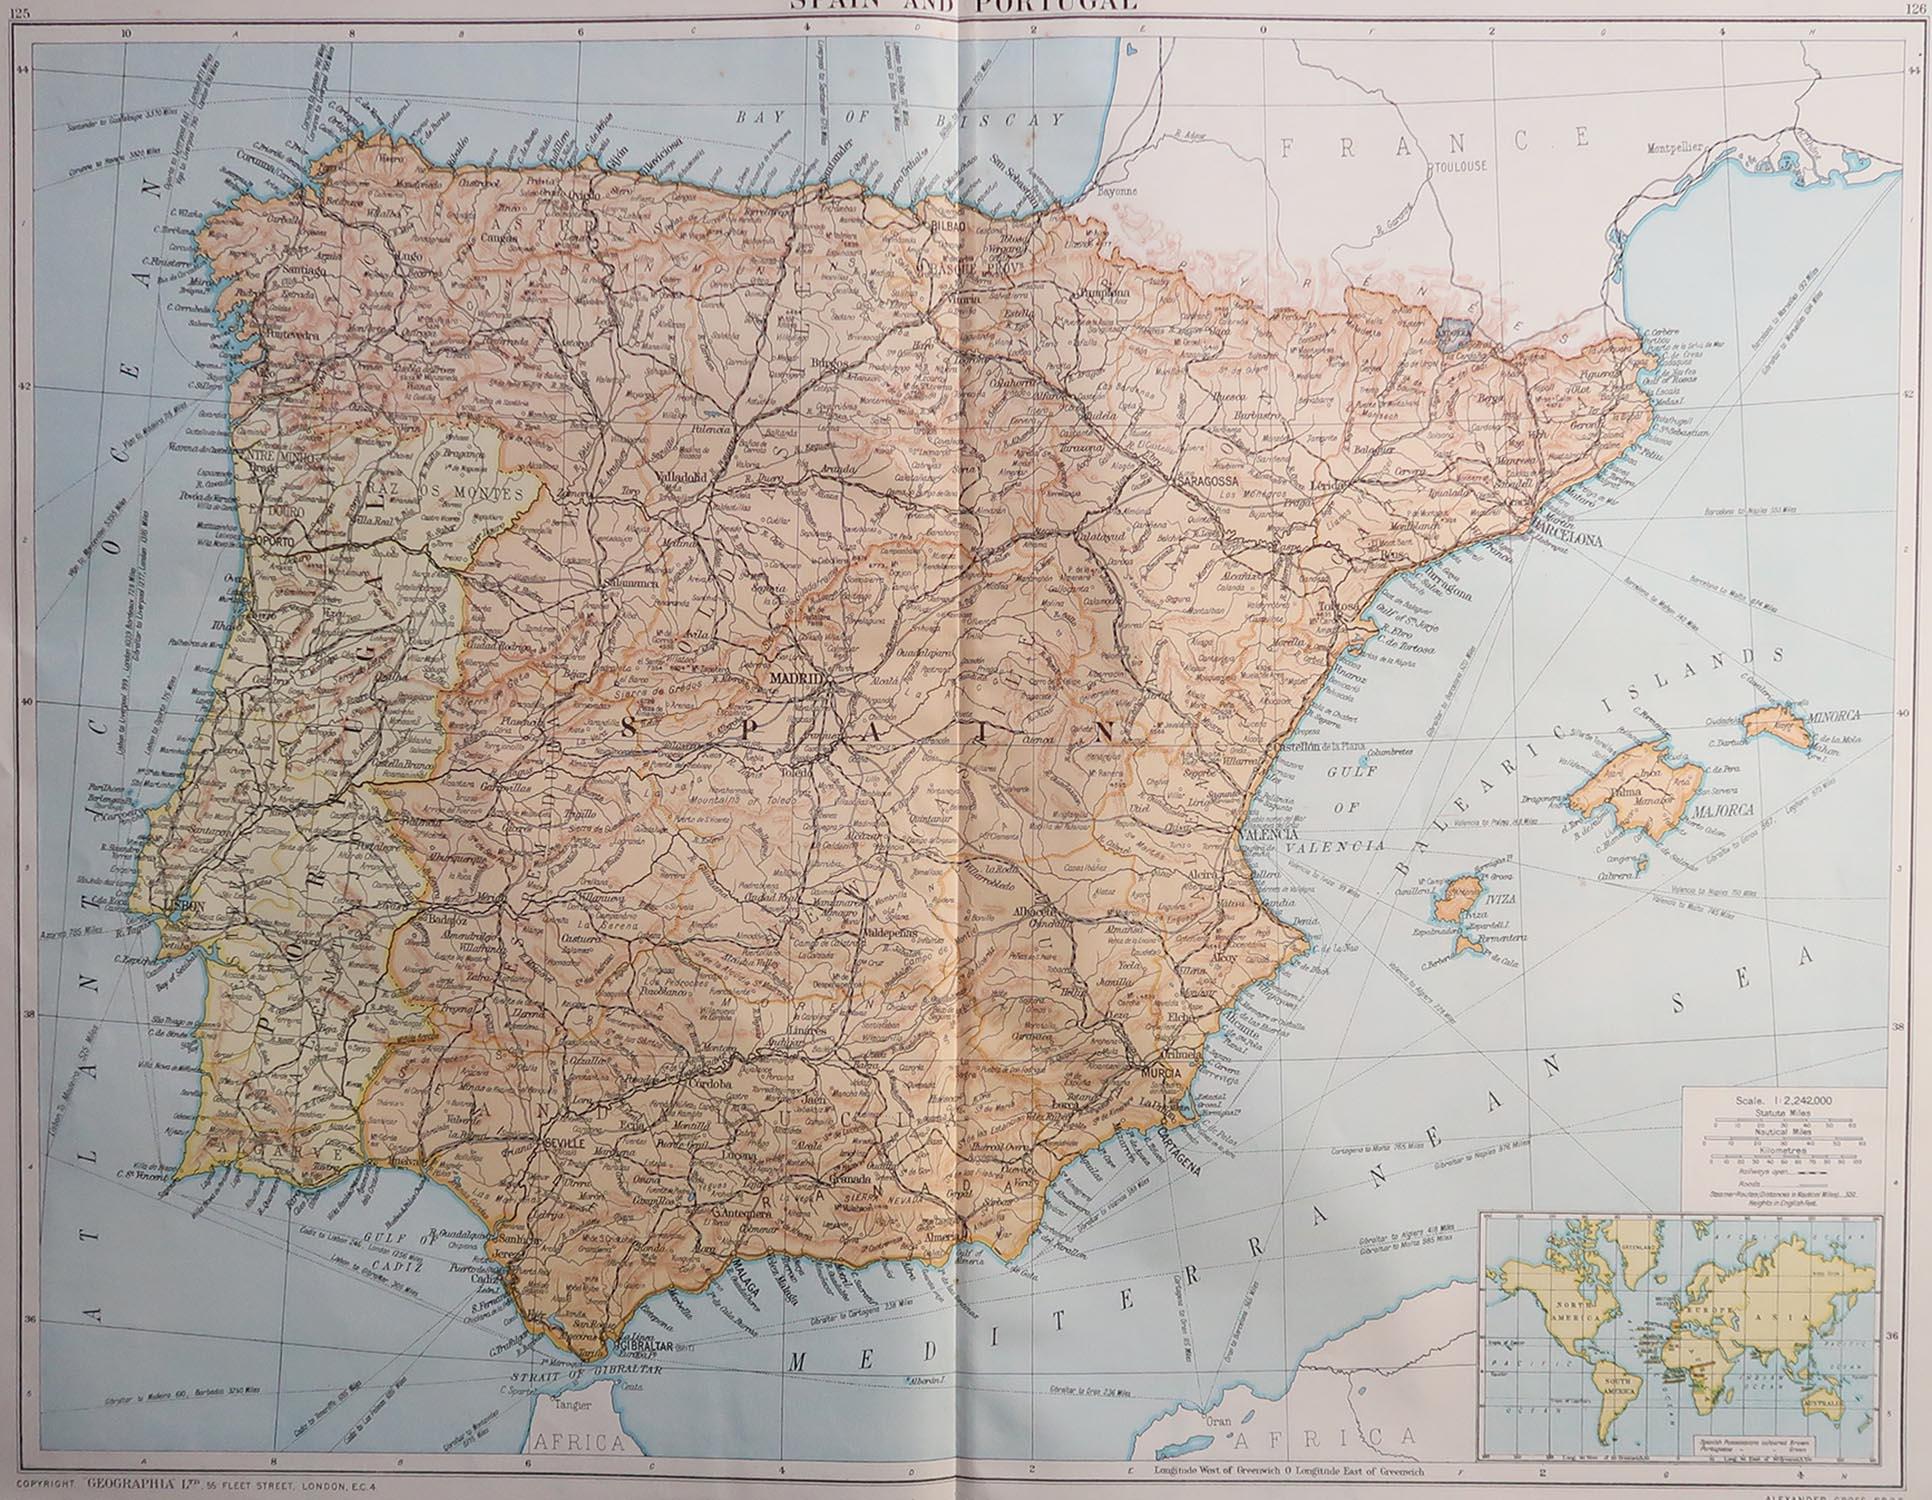 Great map of Spain

Original color.

Good condition 

Published by Alexander Gross

Unframed.








